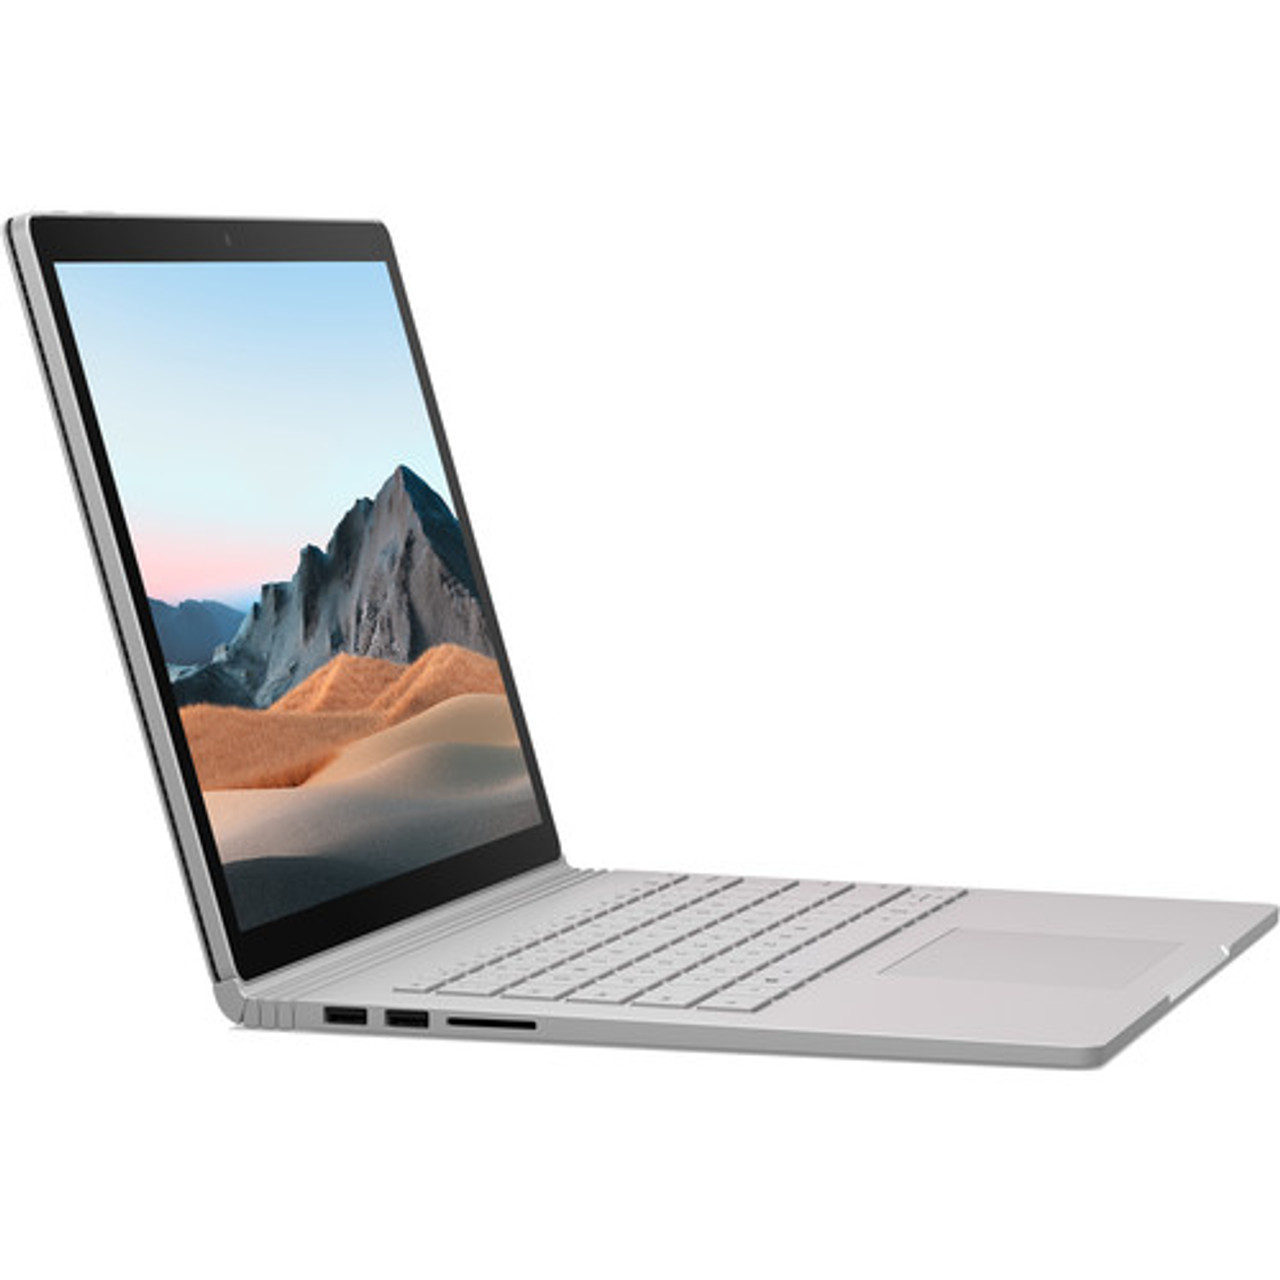 surface book i5 256GB 8GB